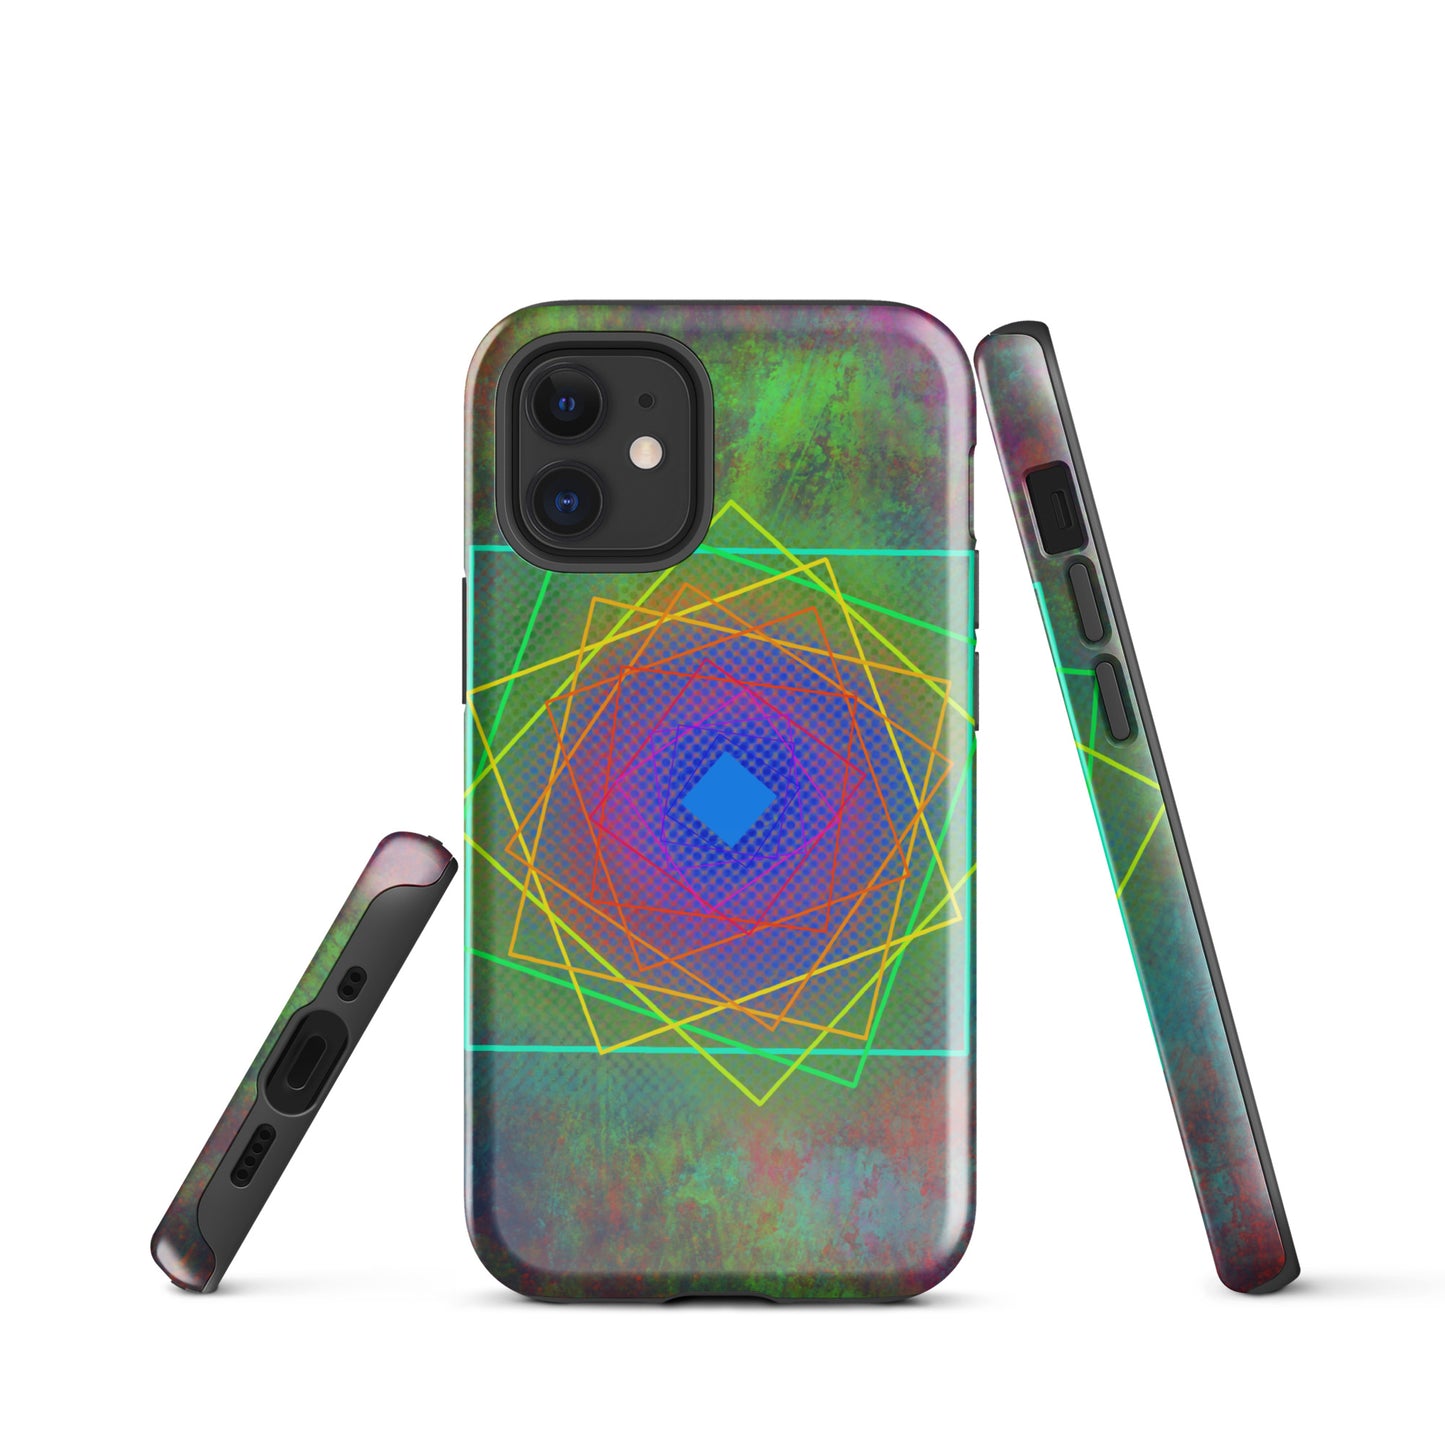 A Colourful Geometric Cubes Case for the iPhone 12 Mini